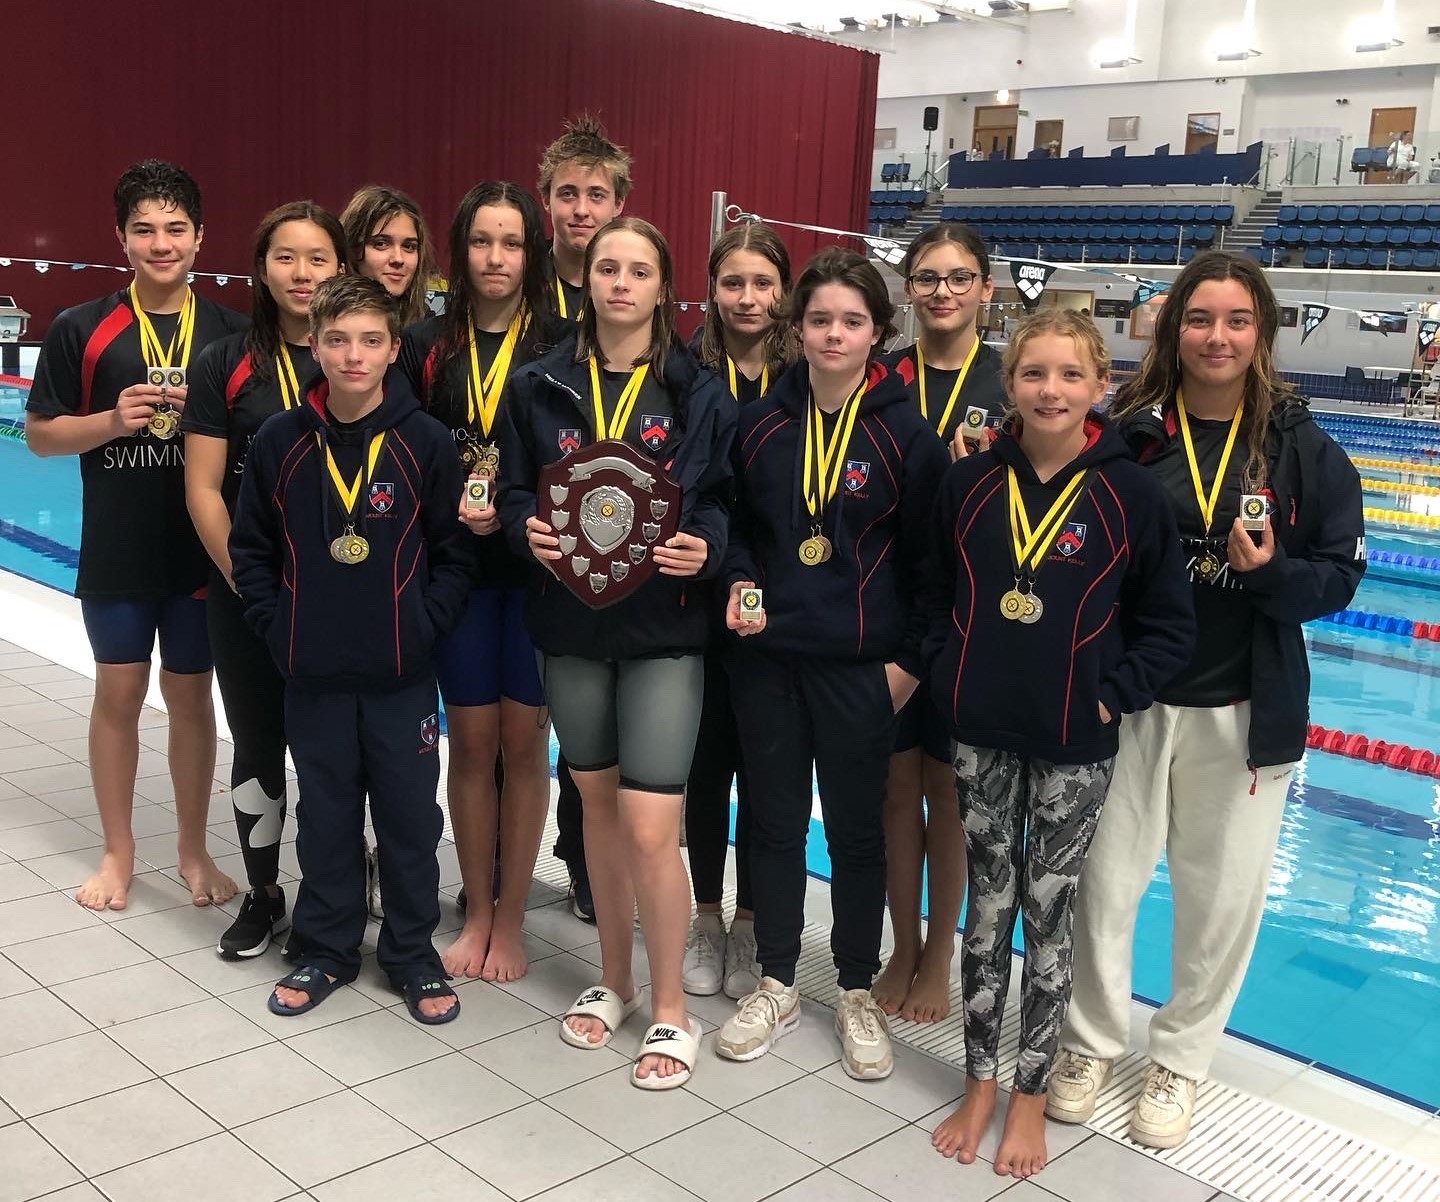 Students with their medals and awards at the swimming pool